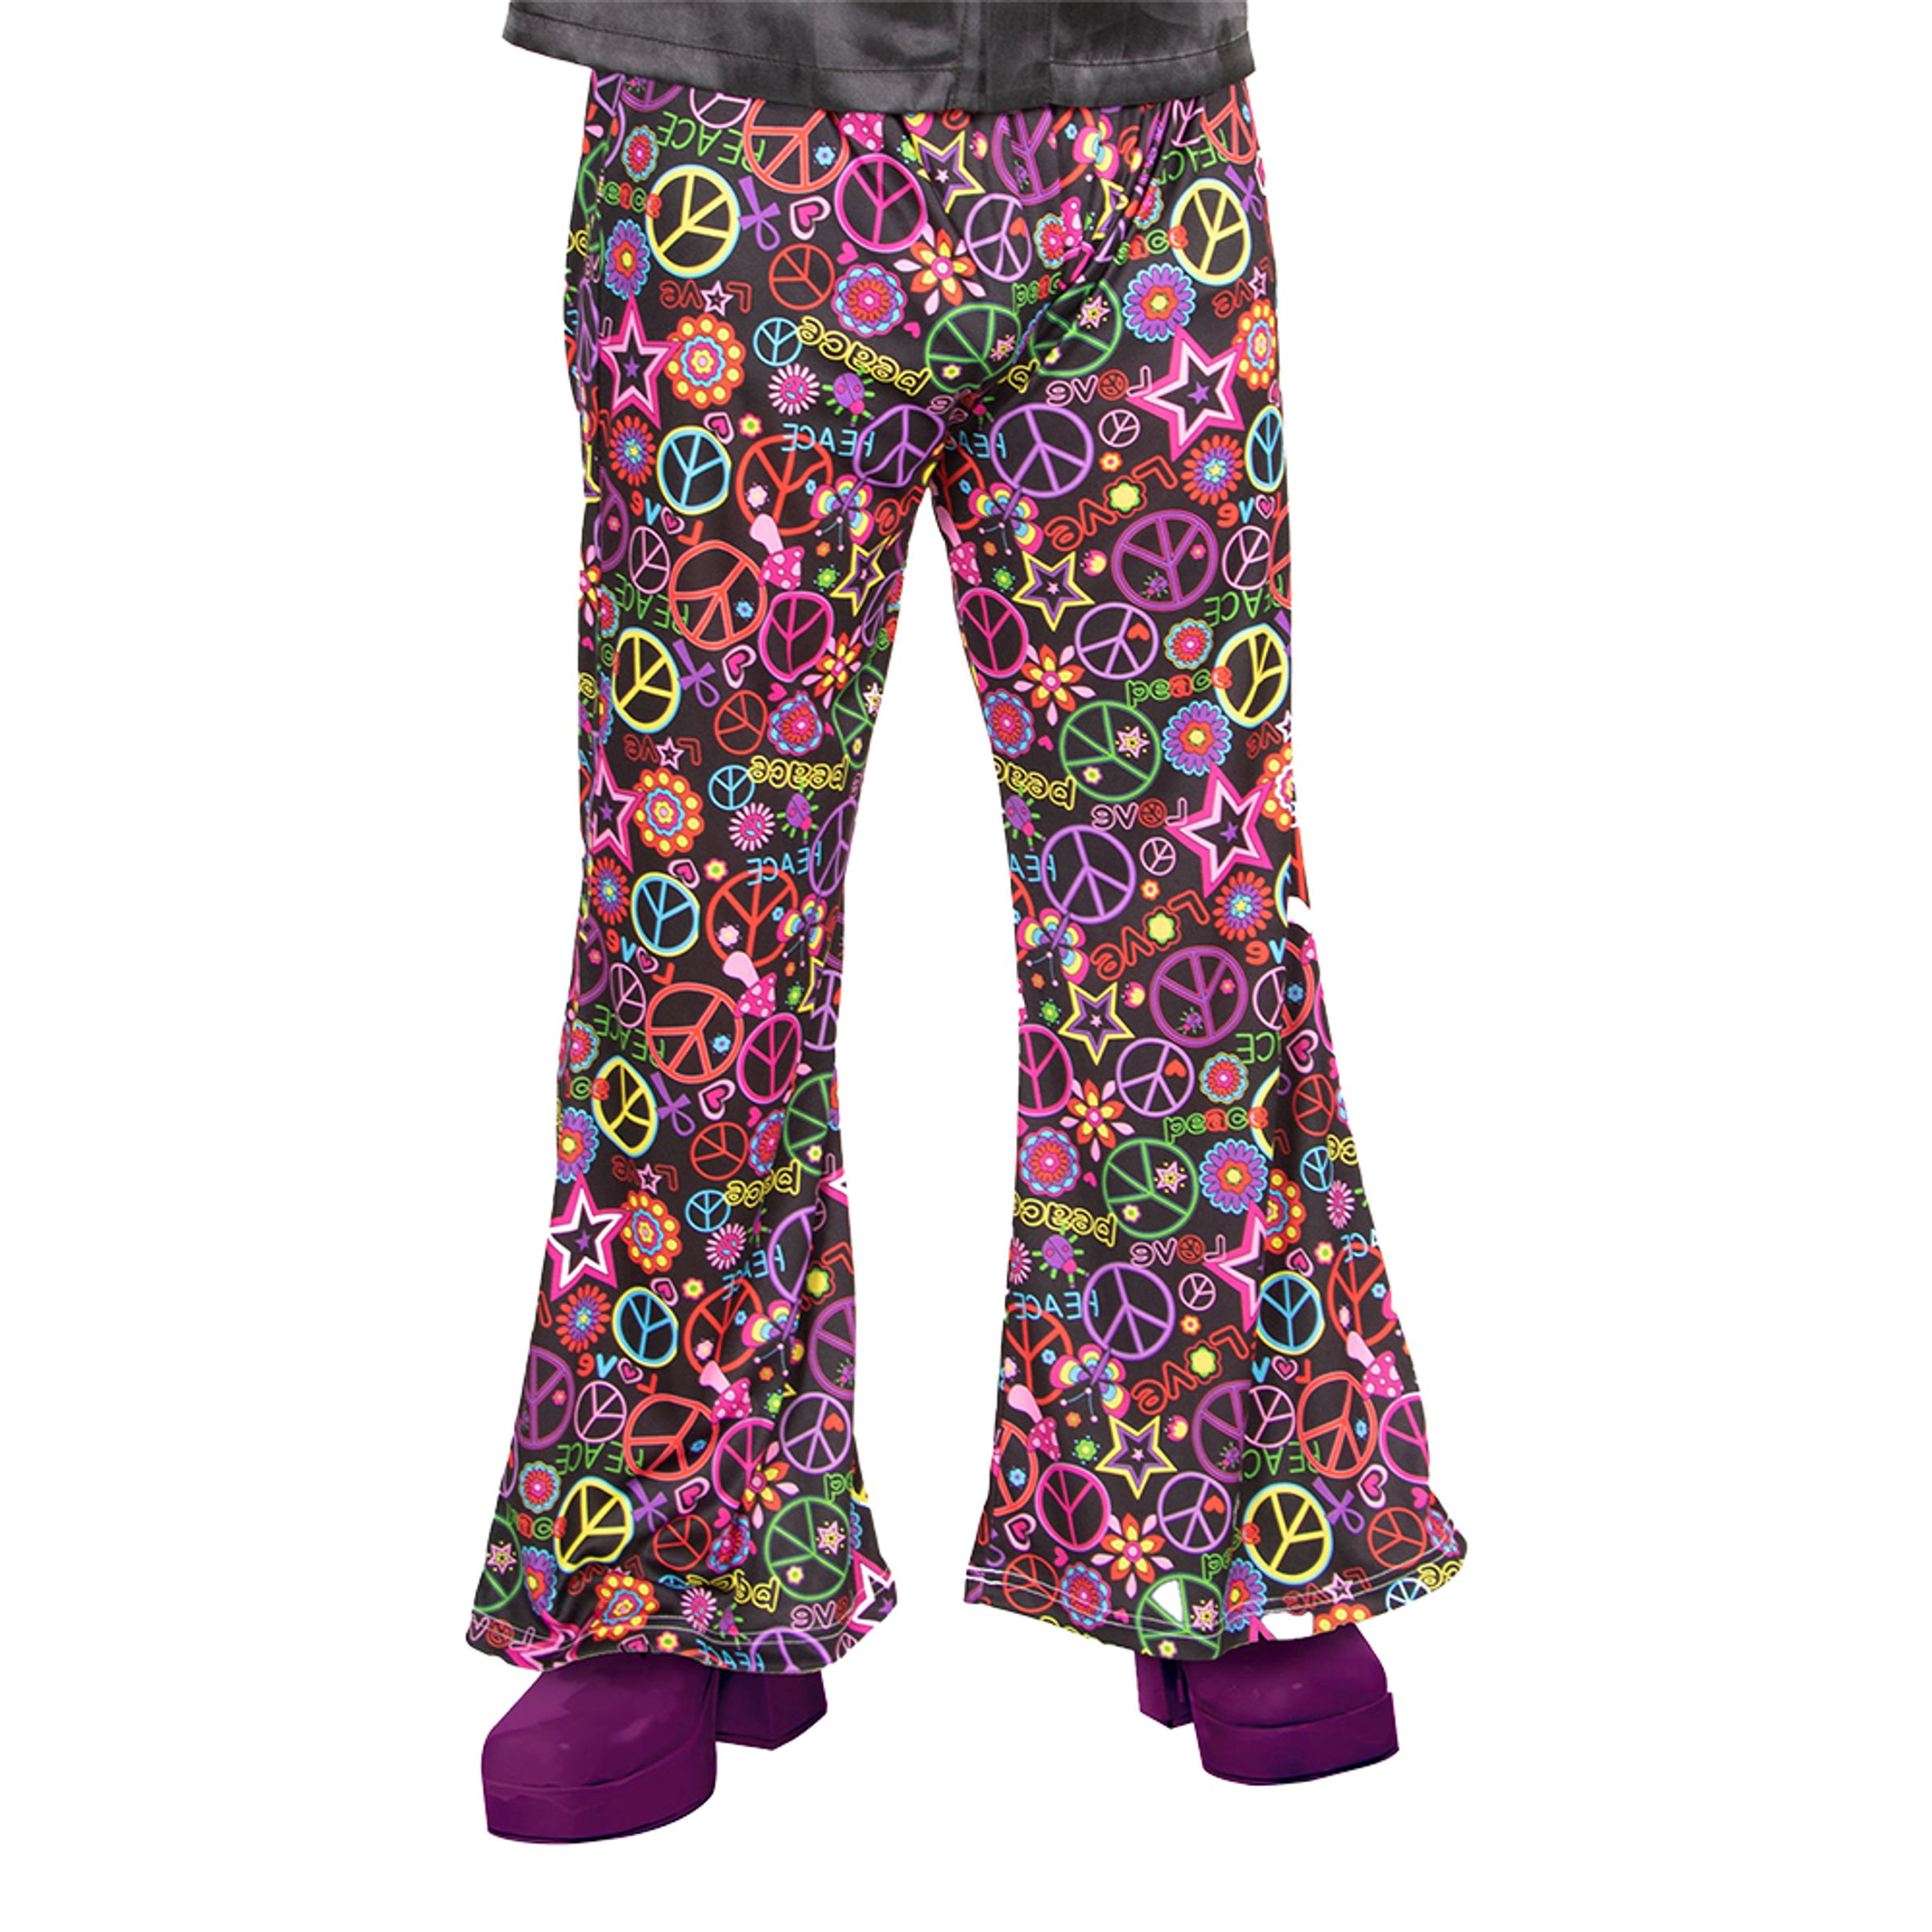 60-tals Peace Out Flares Byxor - Medium/Large